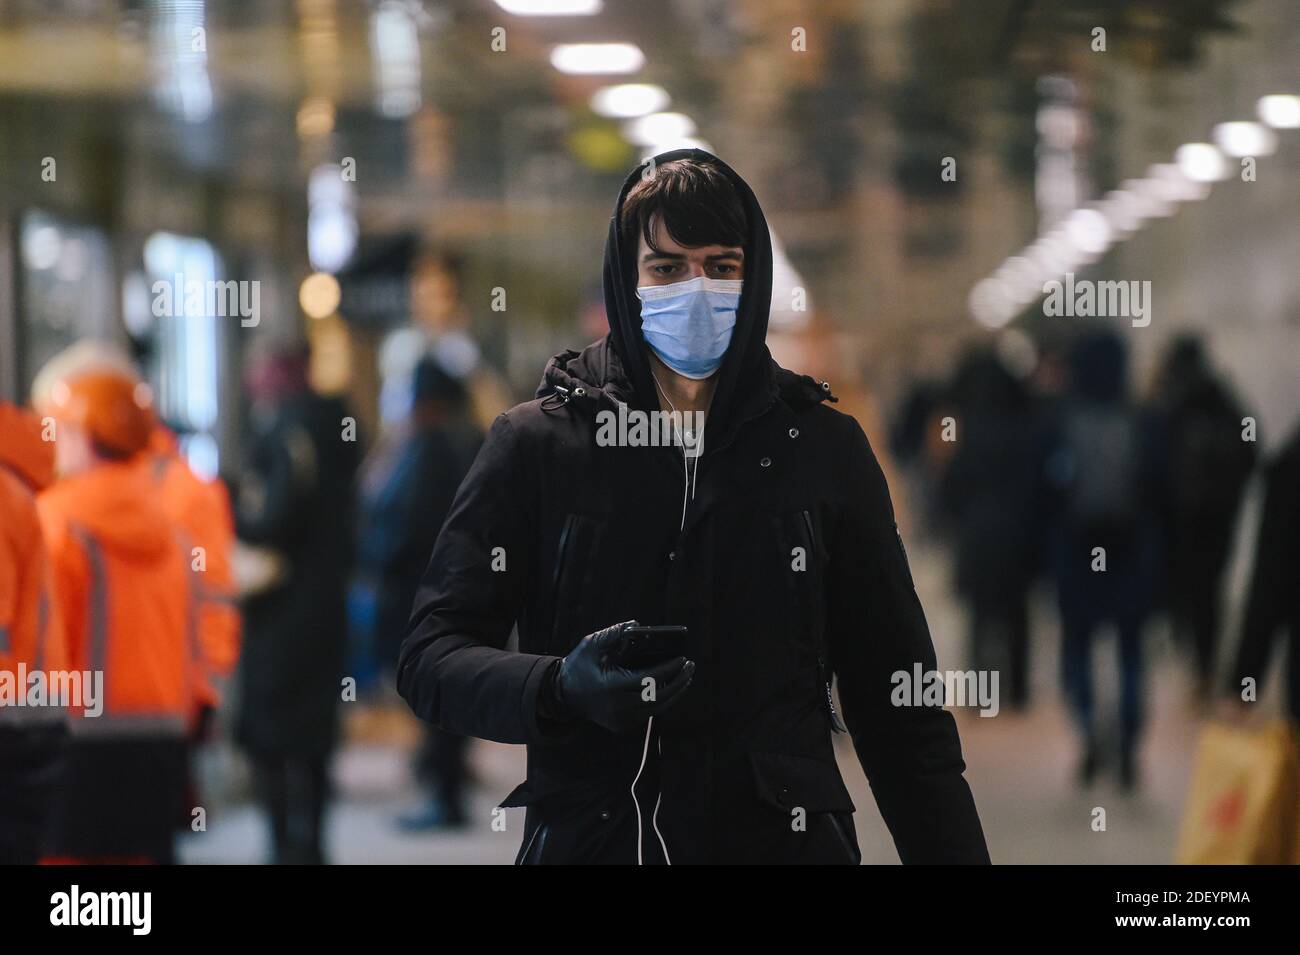 (201202) -- MOSCOW, Dec. 2, 2020 (Xinhua) -- A man wearing a protective mask walks on the street in Moscow, Russia, on Dec. 2, 2020. Russia recorded 25,345 more COVID-19 infections over the past 24 hours, bringing the national tally to 2,347,401, the country's COVID-19 response center said Wednesday. (Xinhua/Evgeny Sinitsyn) Stock Photo